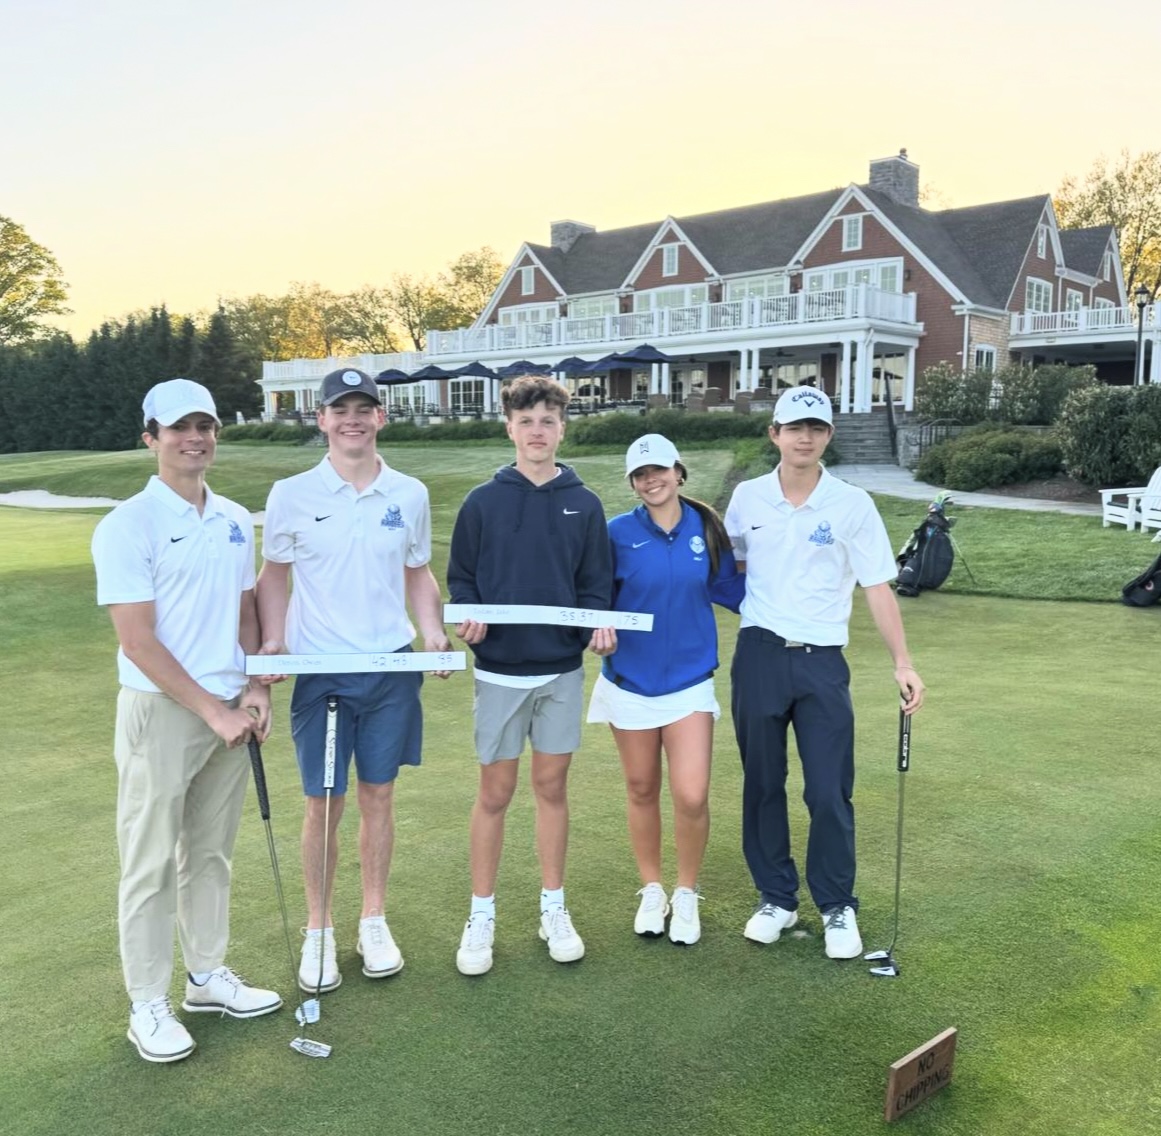 The Scotch Plains-Fanwood high school golf team poses for a picture after the Union County Championship on Wednesday, May 1. The team earned fifth place as Todaro finished third overall.